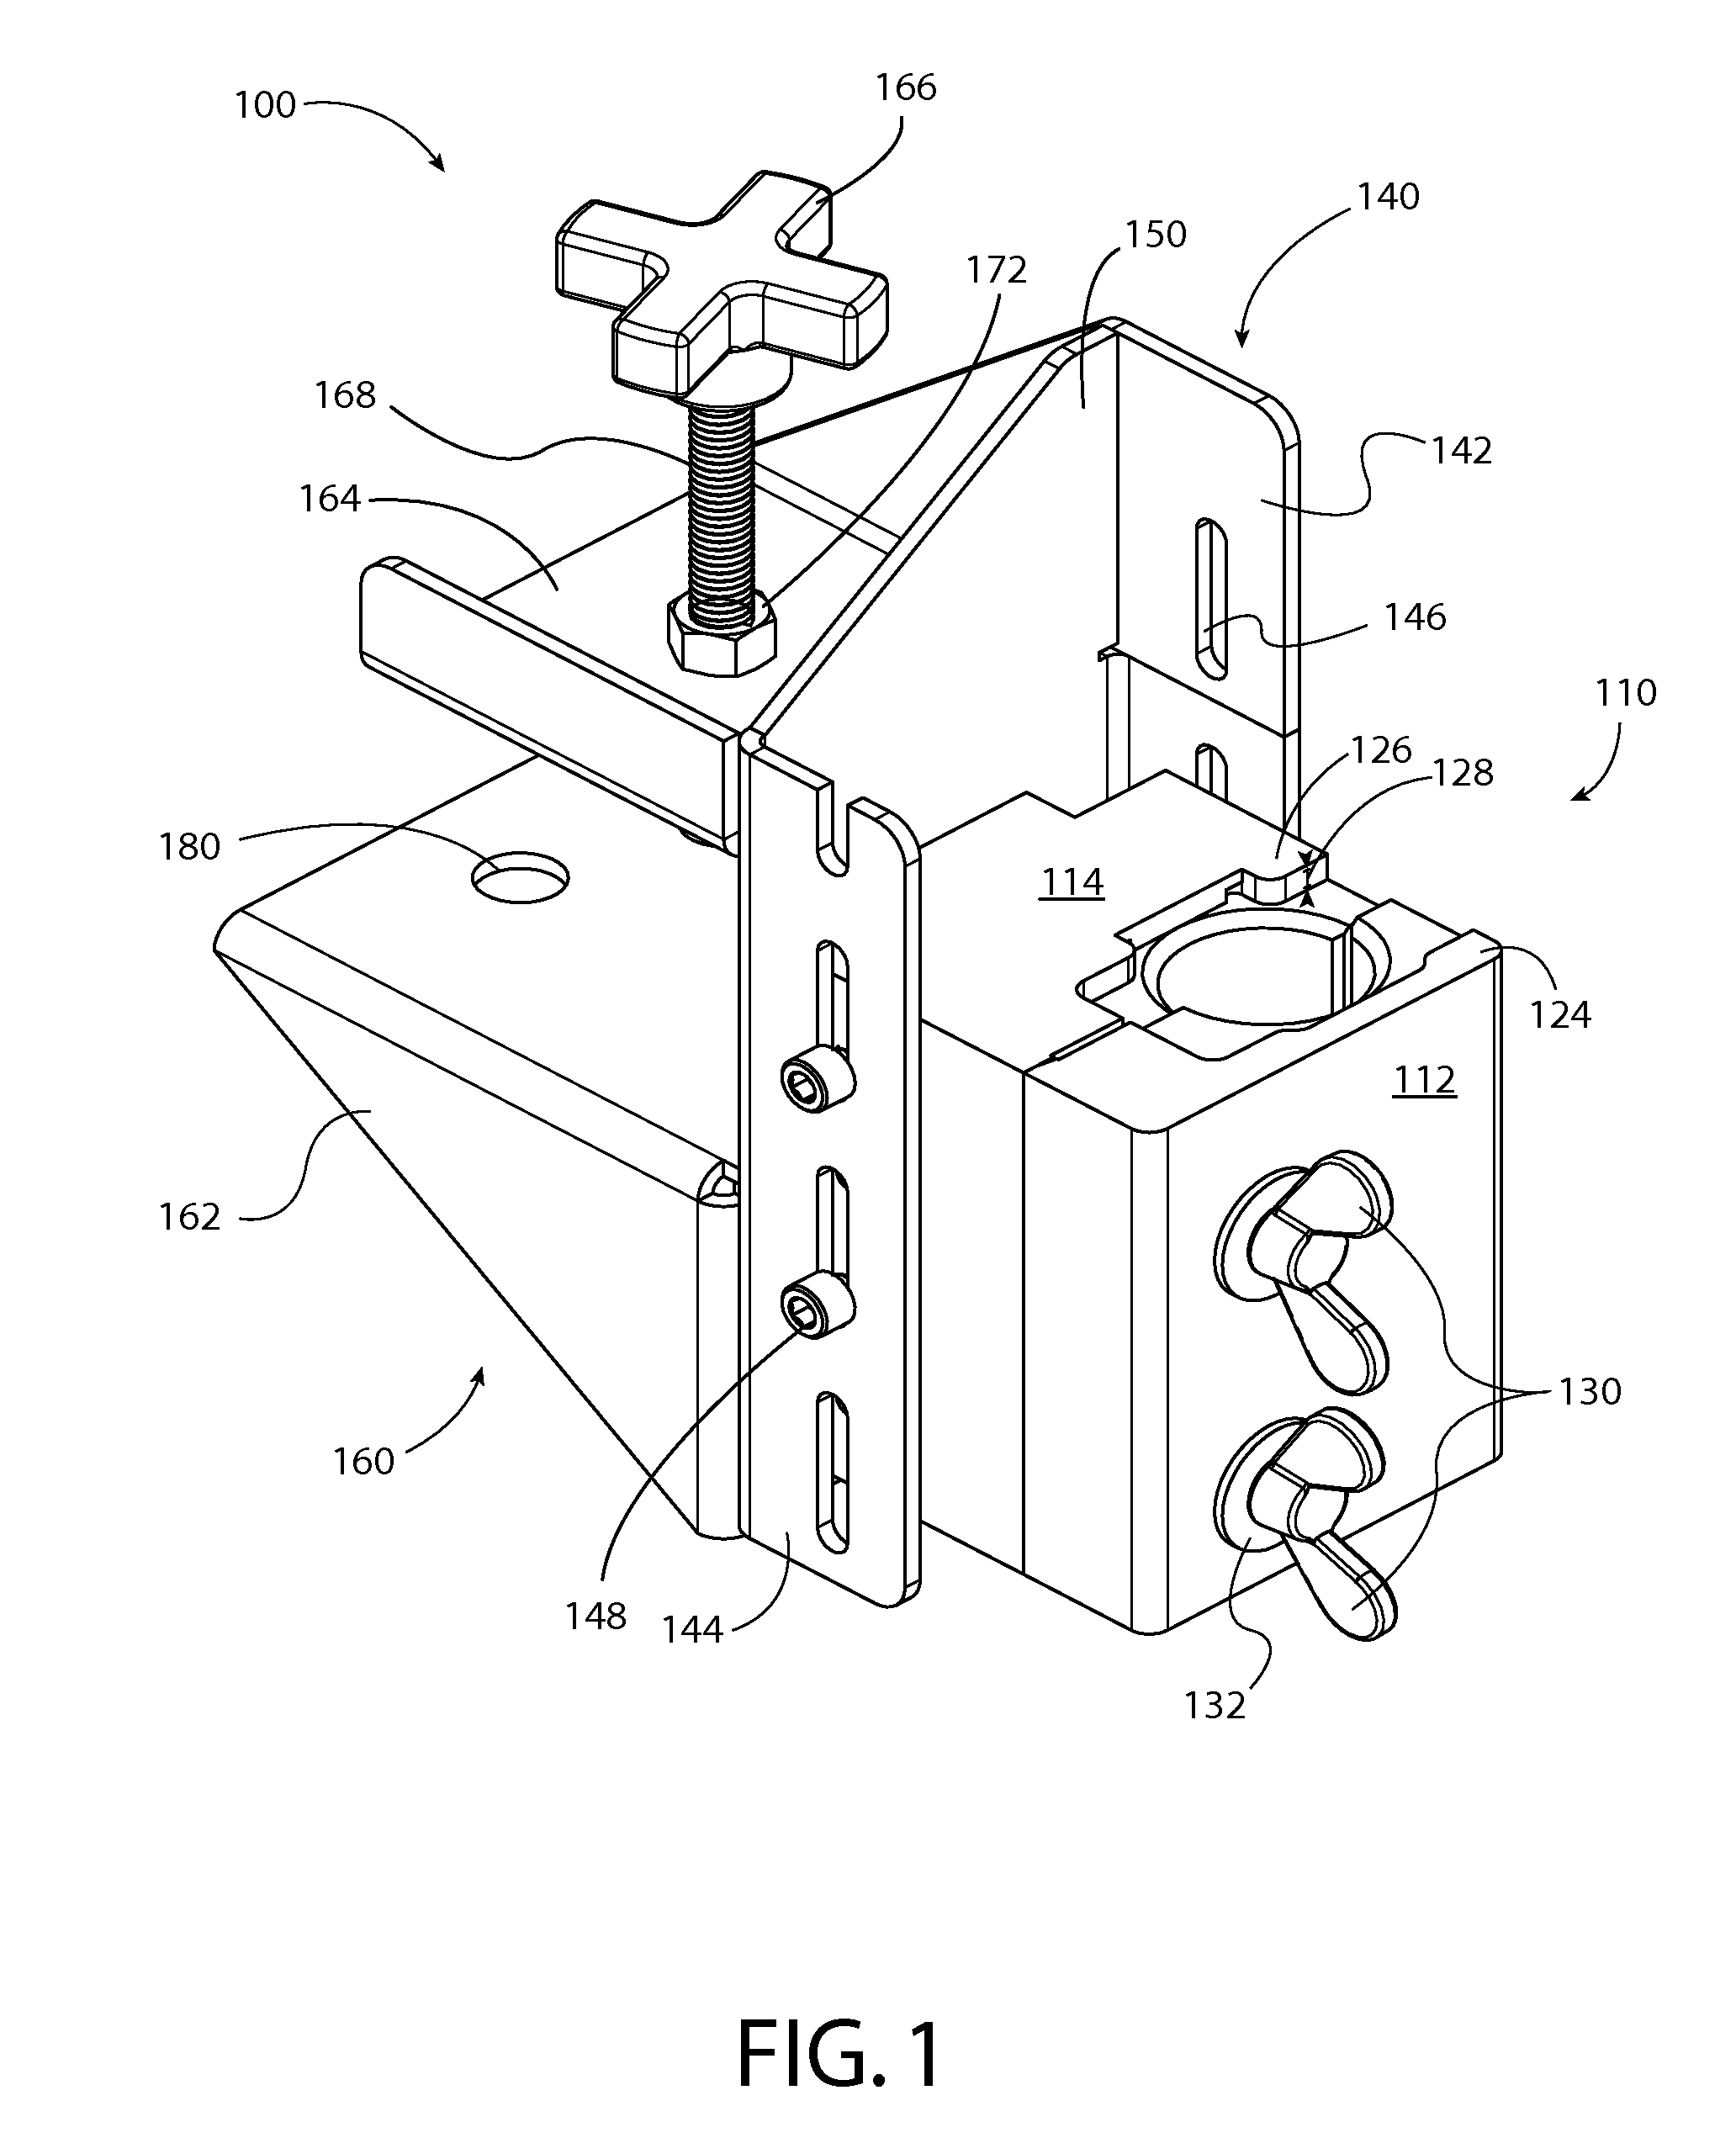 Systems and methods for keyed welding clamp